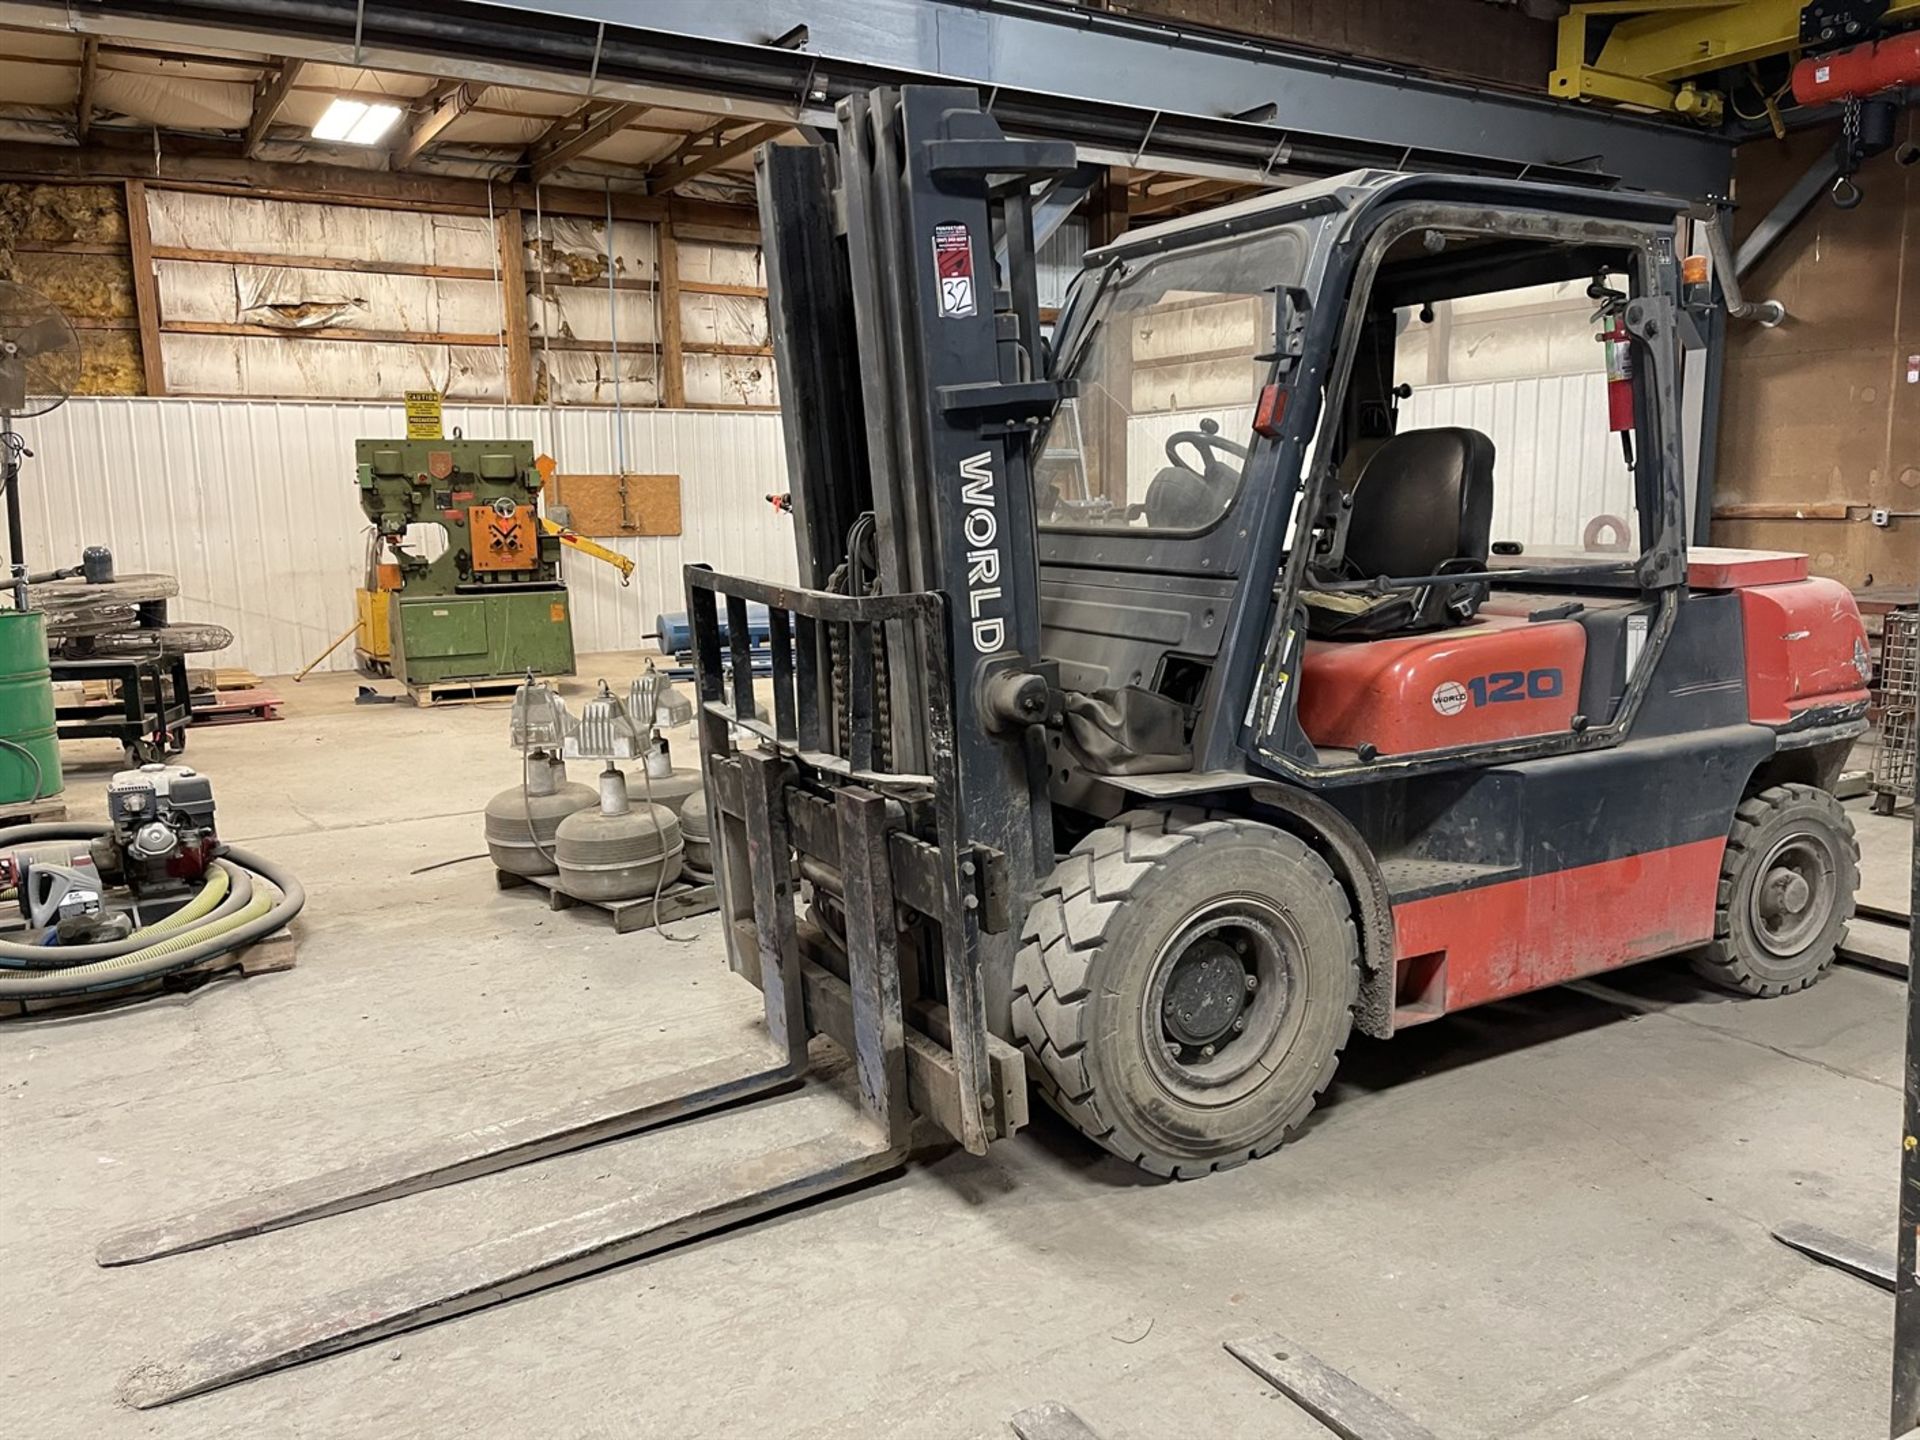 Tailift FD50 Diesel Forklift, s/n TA06739, 8250 Lb. Capacity, 3-Stage Mast, Side Shift